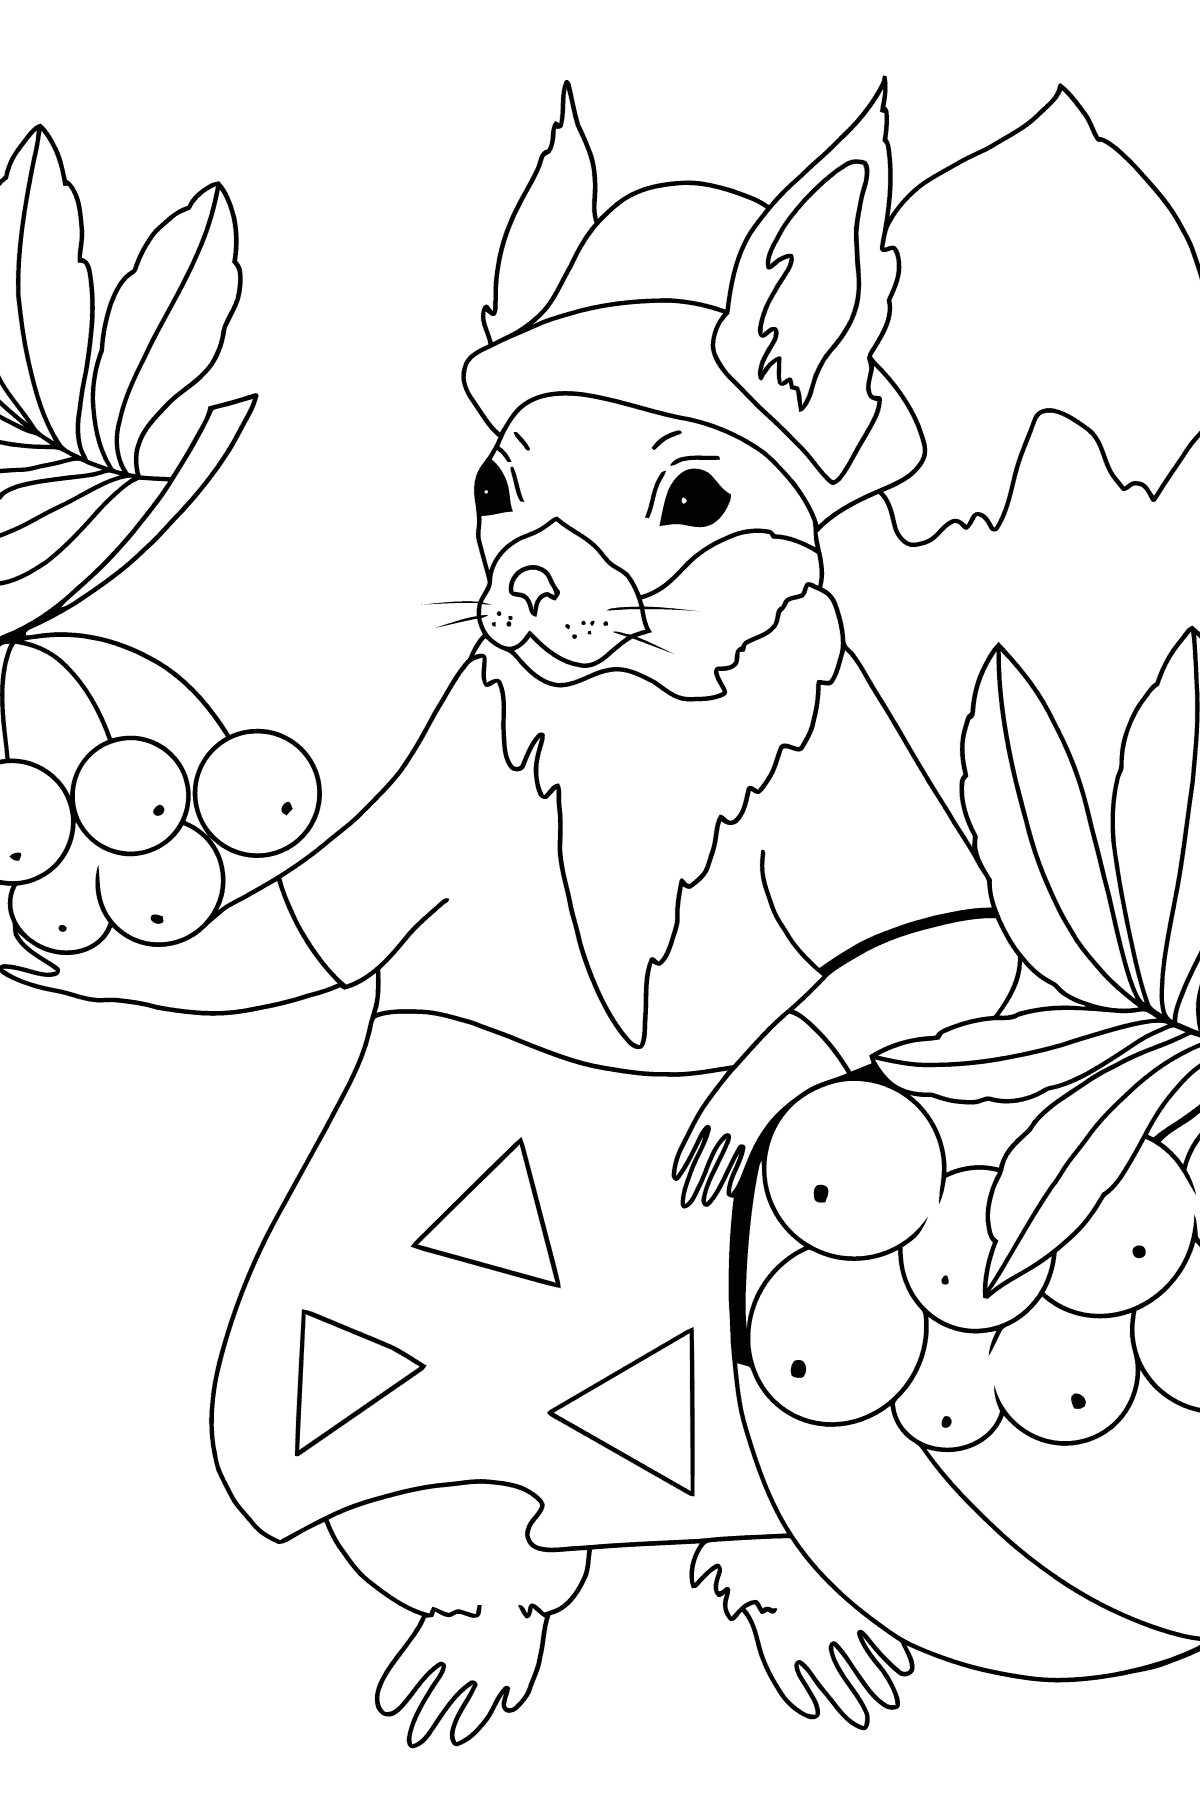 Autumn Coloring Page - Rowanberry Harvest Time for Kids 